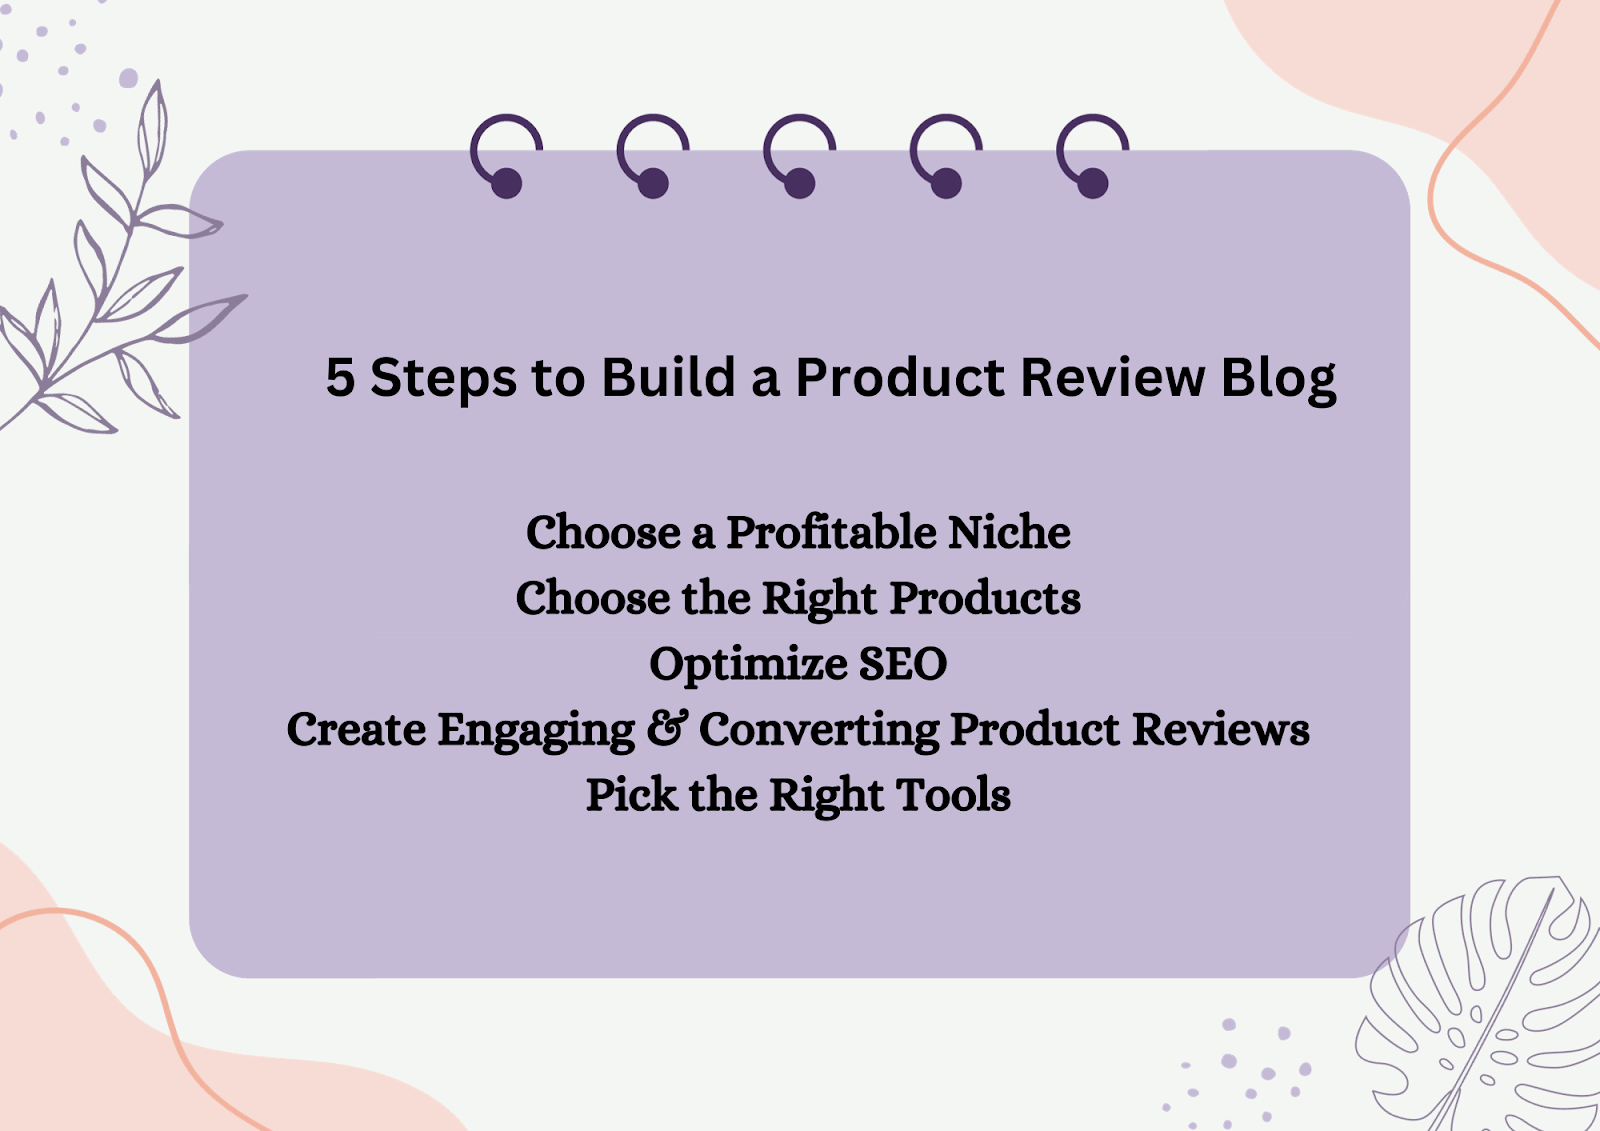 5 Steps to Build a Profitable Product Review Blog